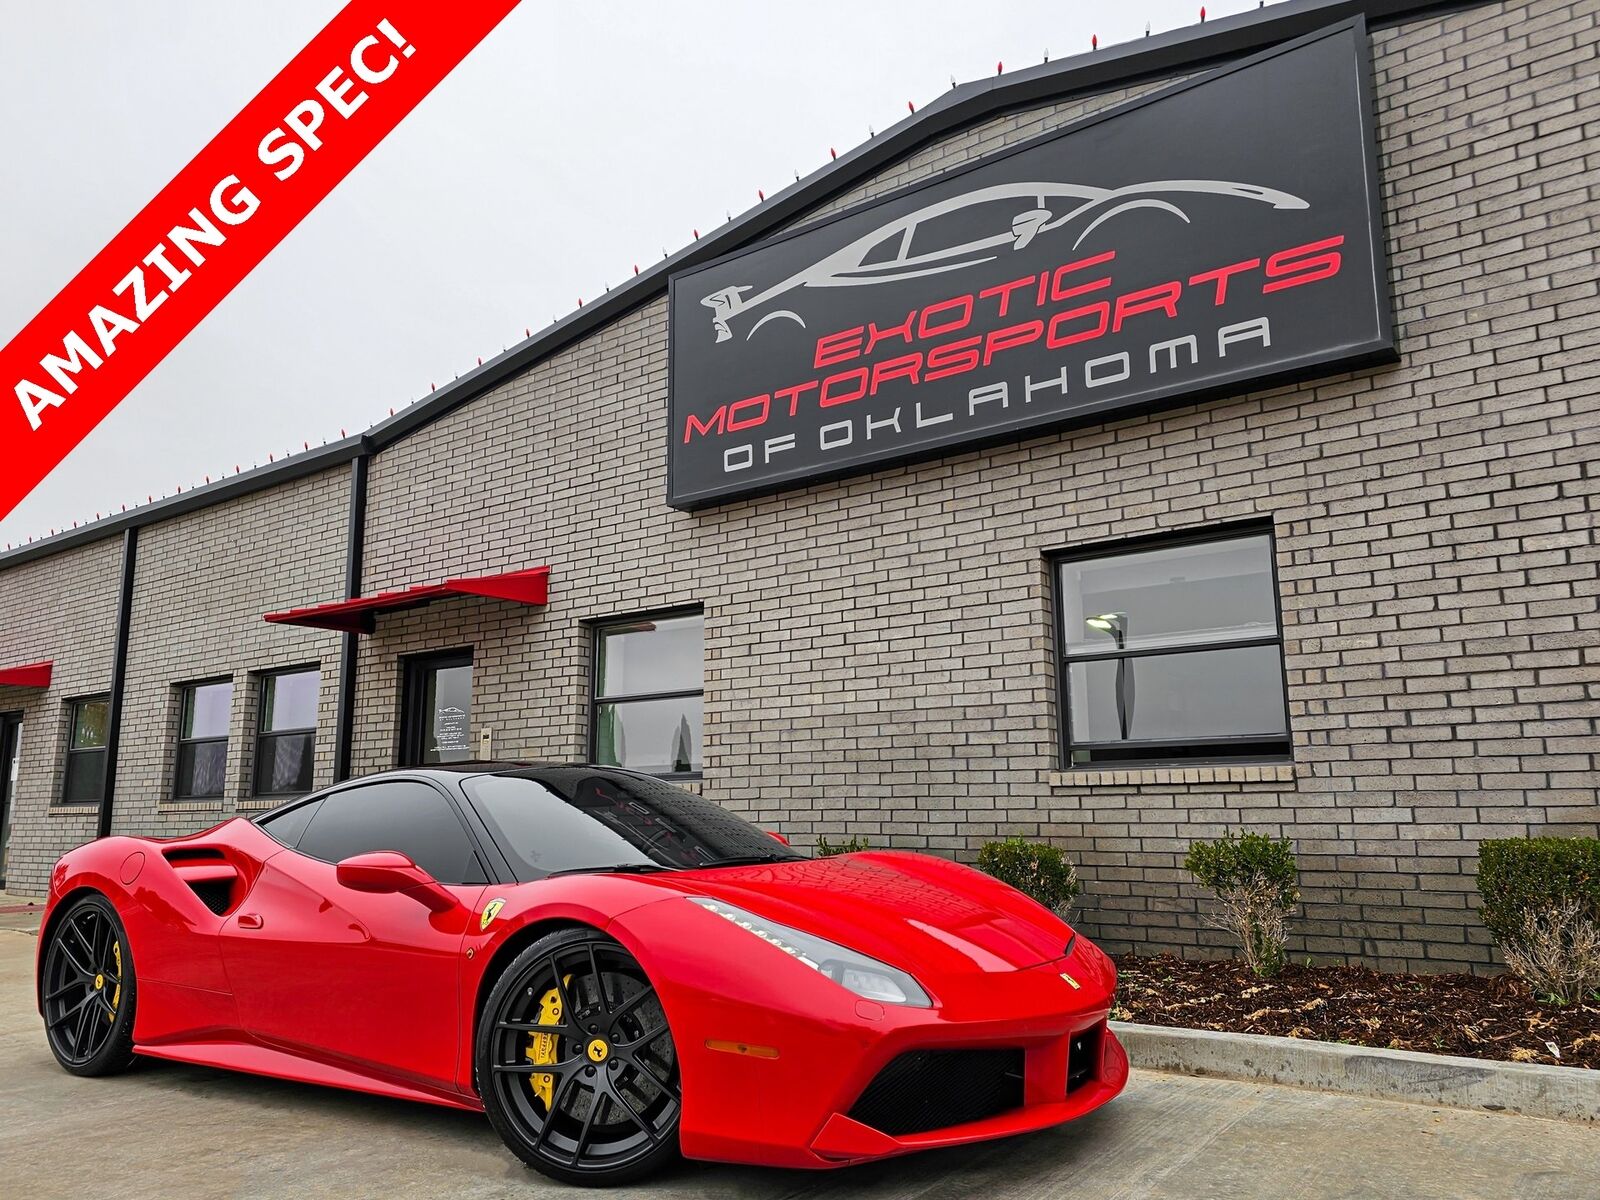 2017 Ferrari 488 GTB, Rosso Corsa with 8865 Miles available now!